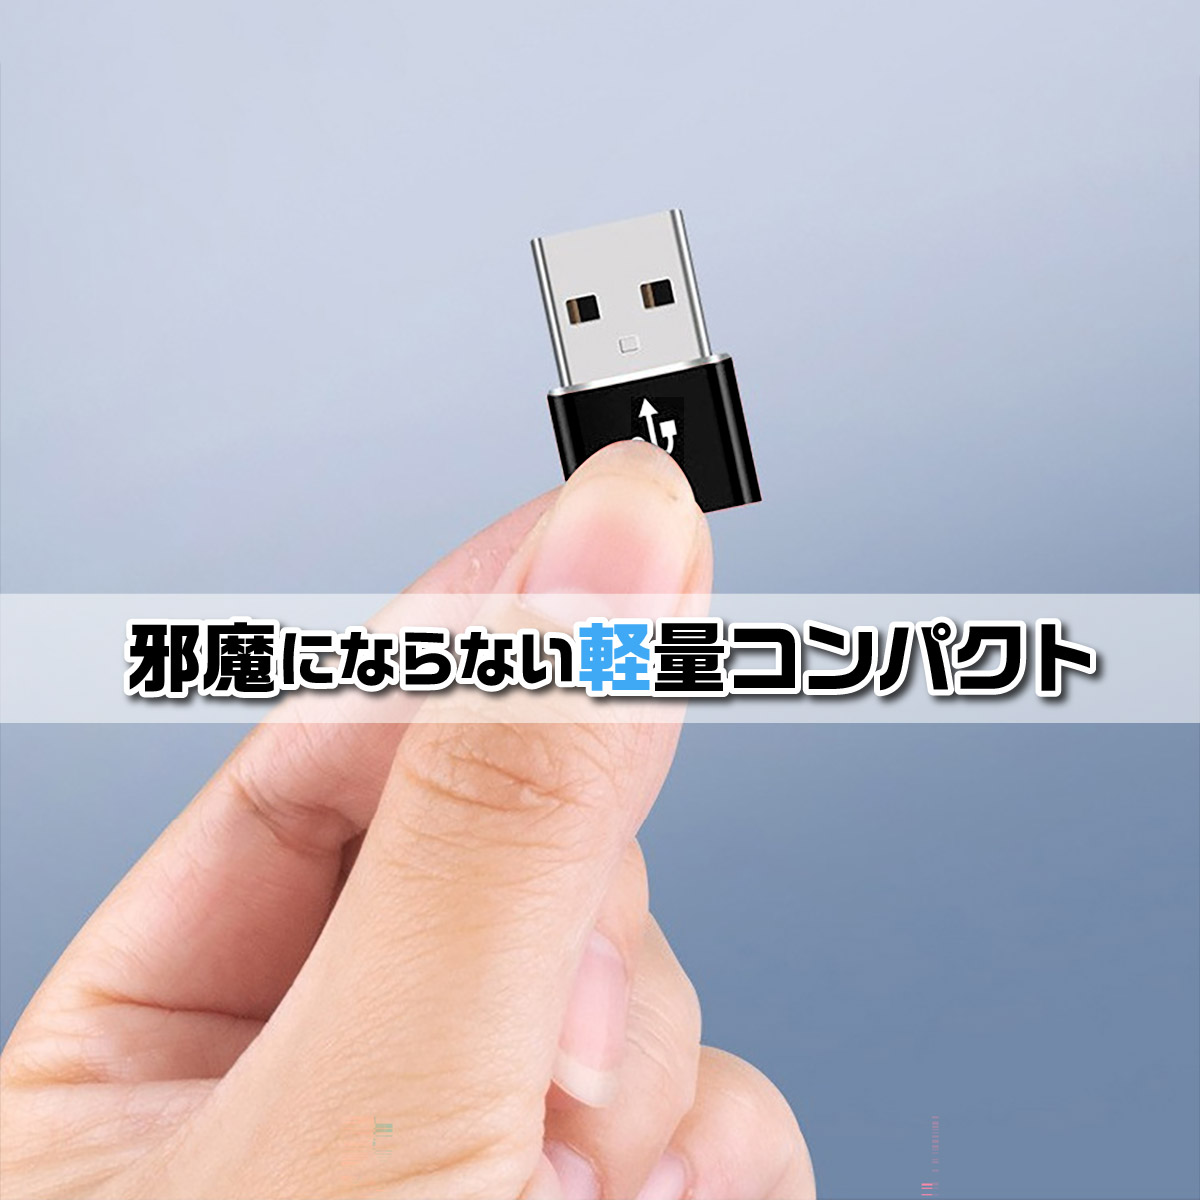 Type-C 変換アダプター USB Type-A 充電器 タイプC to USBタイプA iPhone スマホ HDD SSD パソコン ハブ データ転送 コンパクト 小さい｜heureux｜11